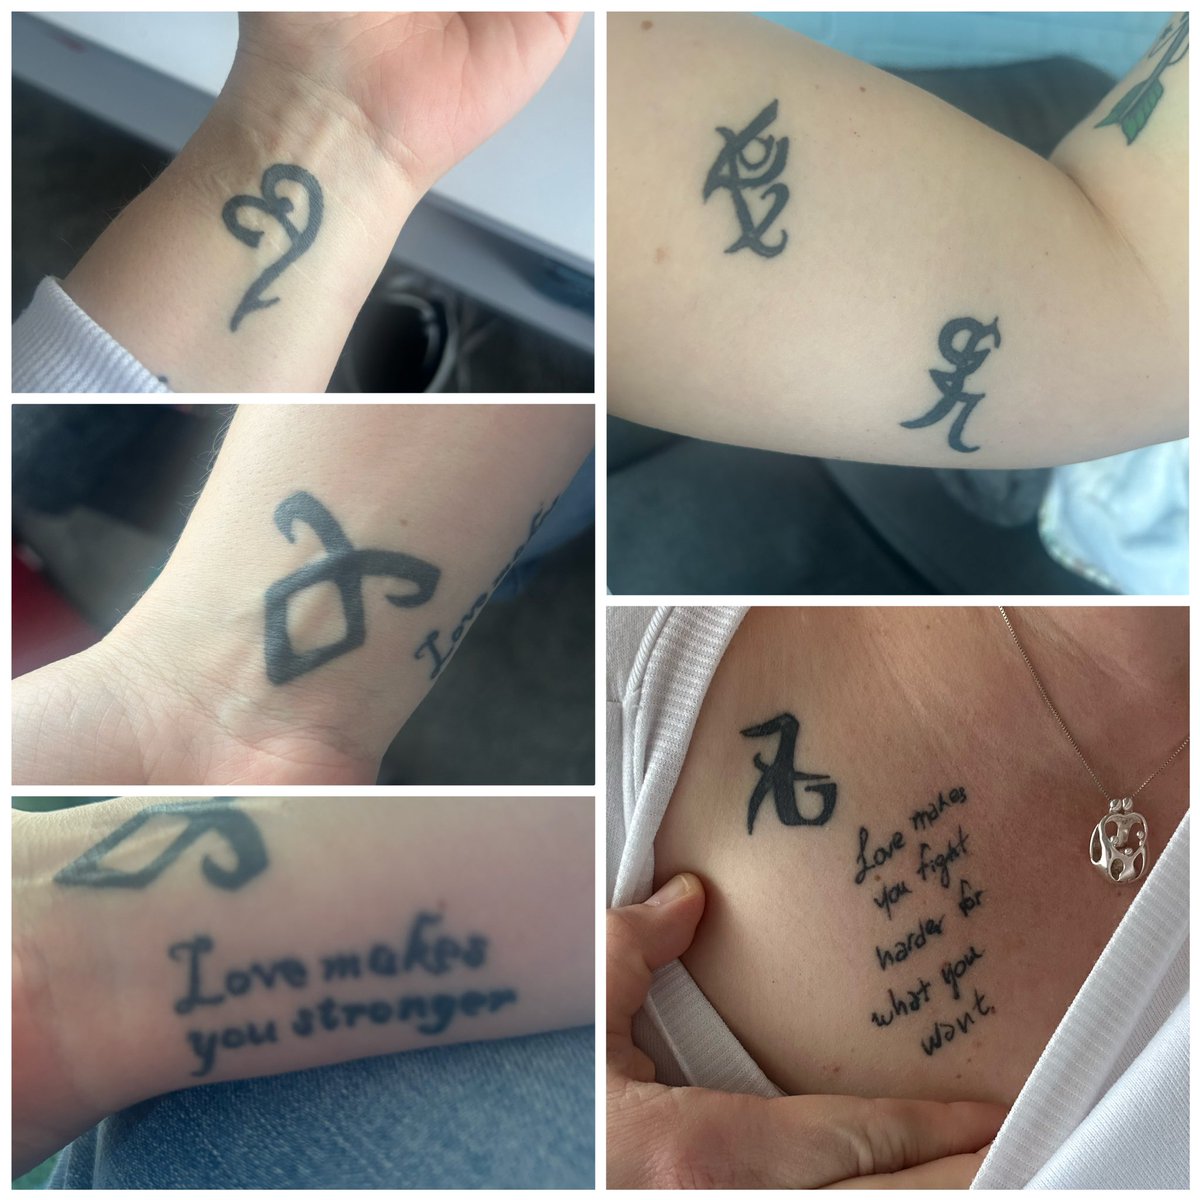 These are my Shadowhunters tattoos. 5 runes en two quotes. One of them is written by @Kat_McNamara 🥰 I don’t know if I’m done yet 😅 Who is a Shadowhunters tattoo? #Shadowhunters #shadowfam #shadowhuntersForLife @cassieclare